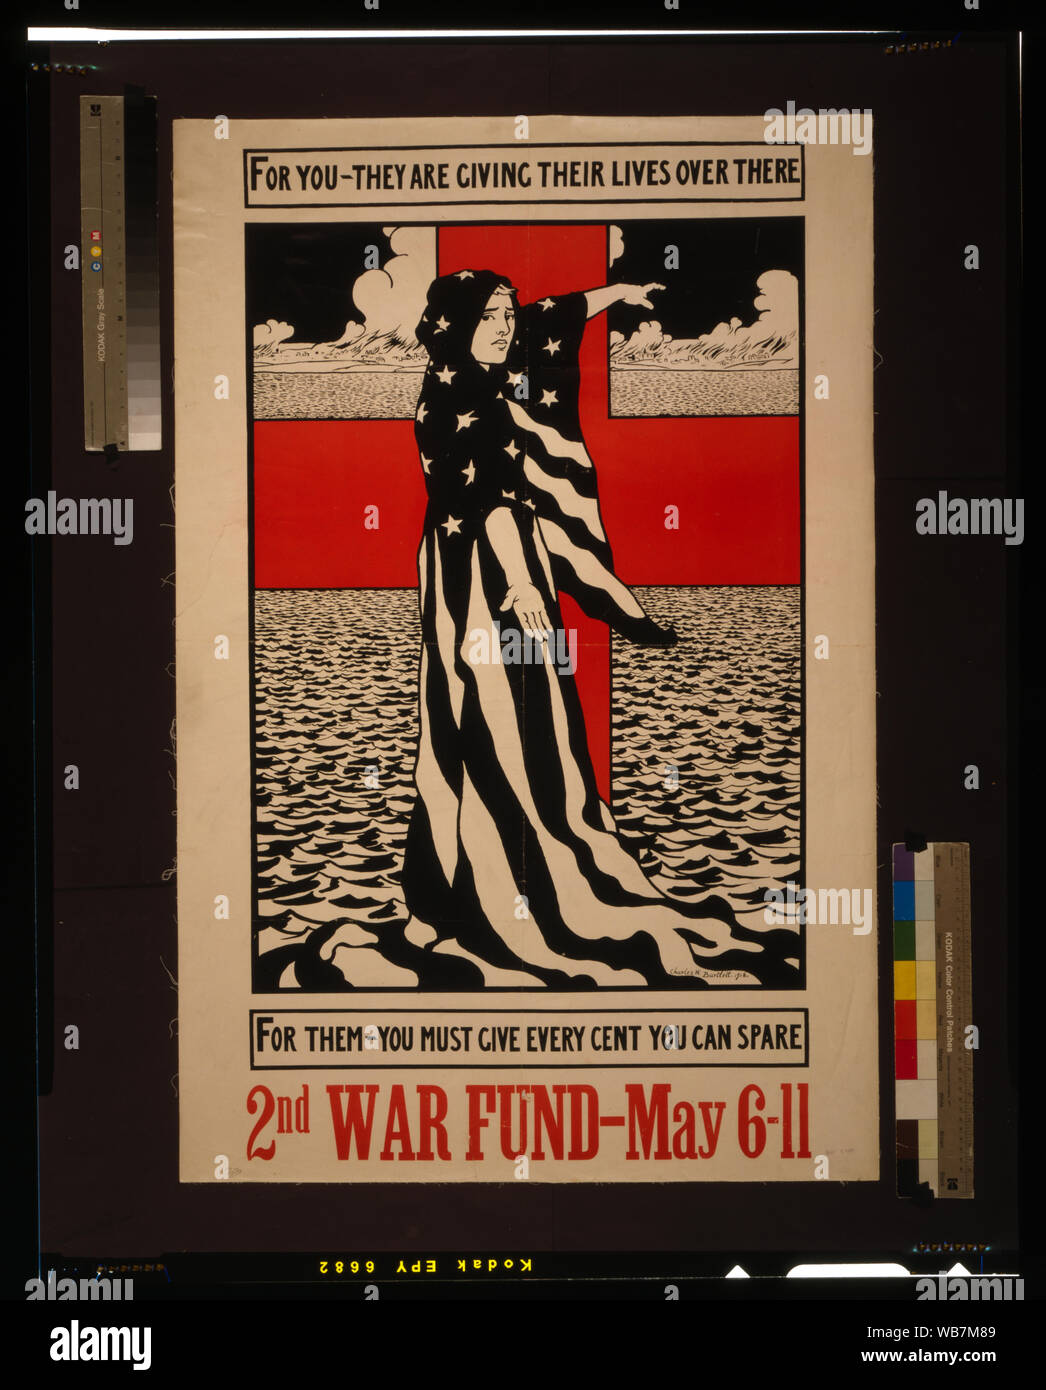 For you - they are giving their lives over there--For them - you must give every cent you can spare Abstract: Poster showing a woman draped in American flag, in front of red cross, pointing across ocean. Stock Photo